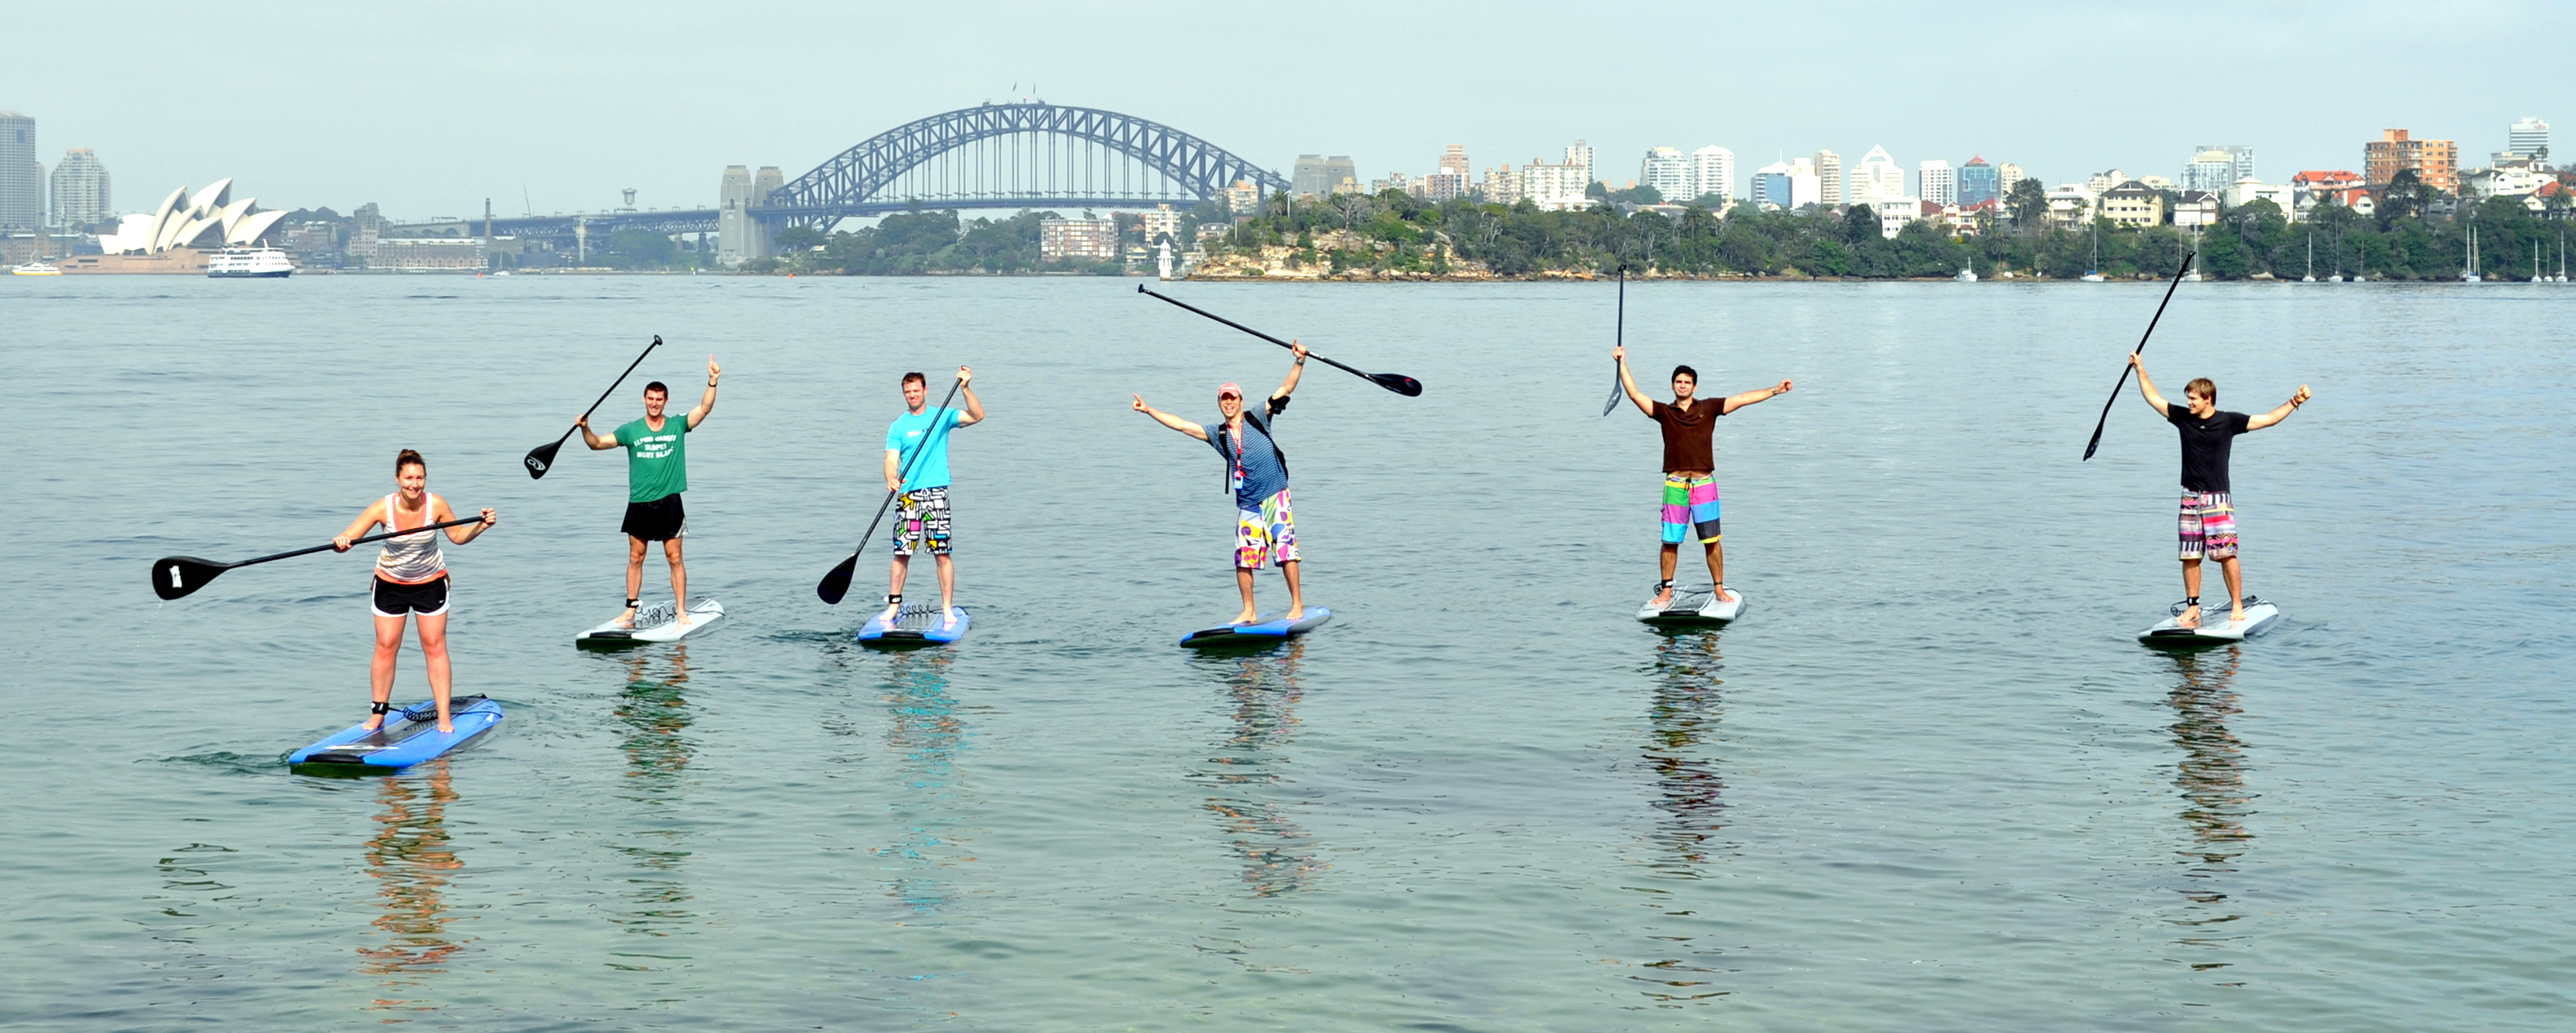 1 - Sydney Scenic SUP - Stand Up Paddleboard Tours on Sydney Harbour